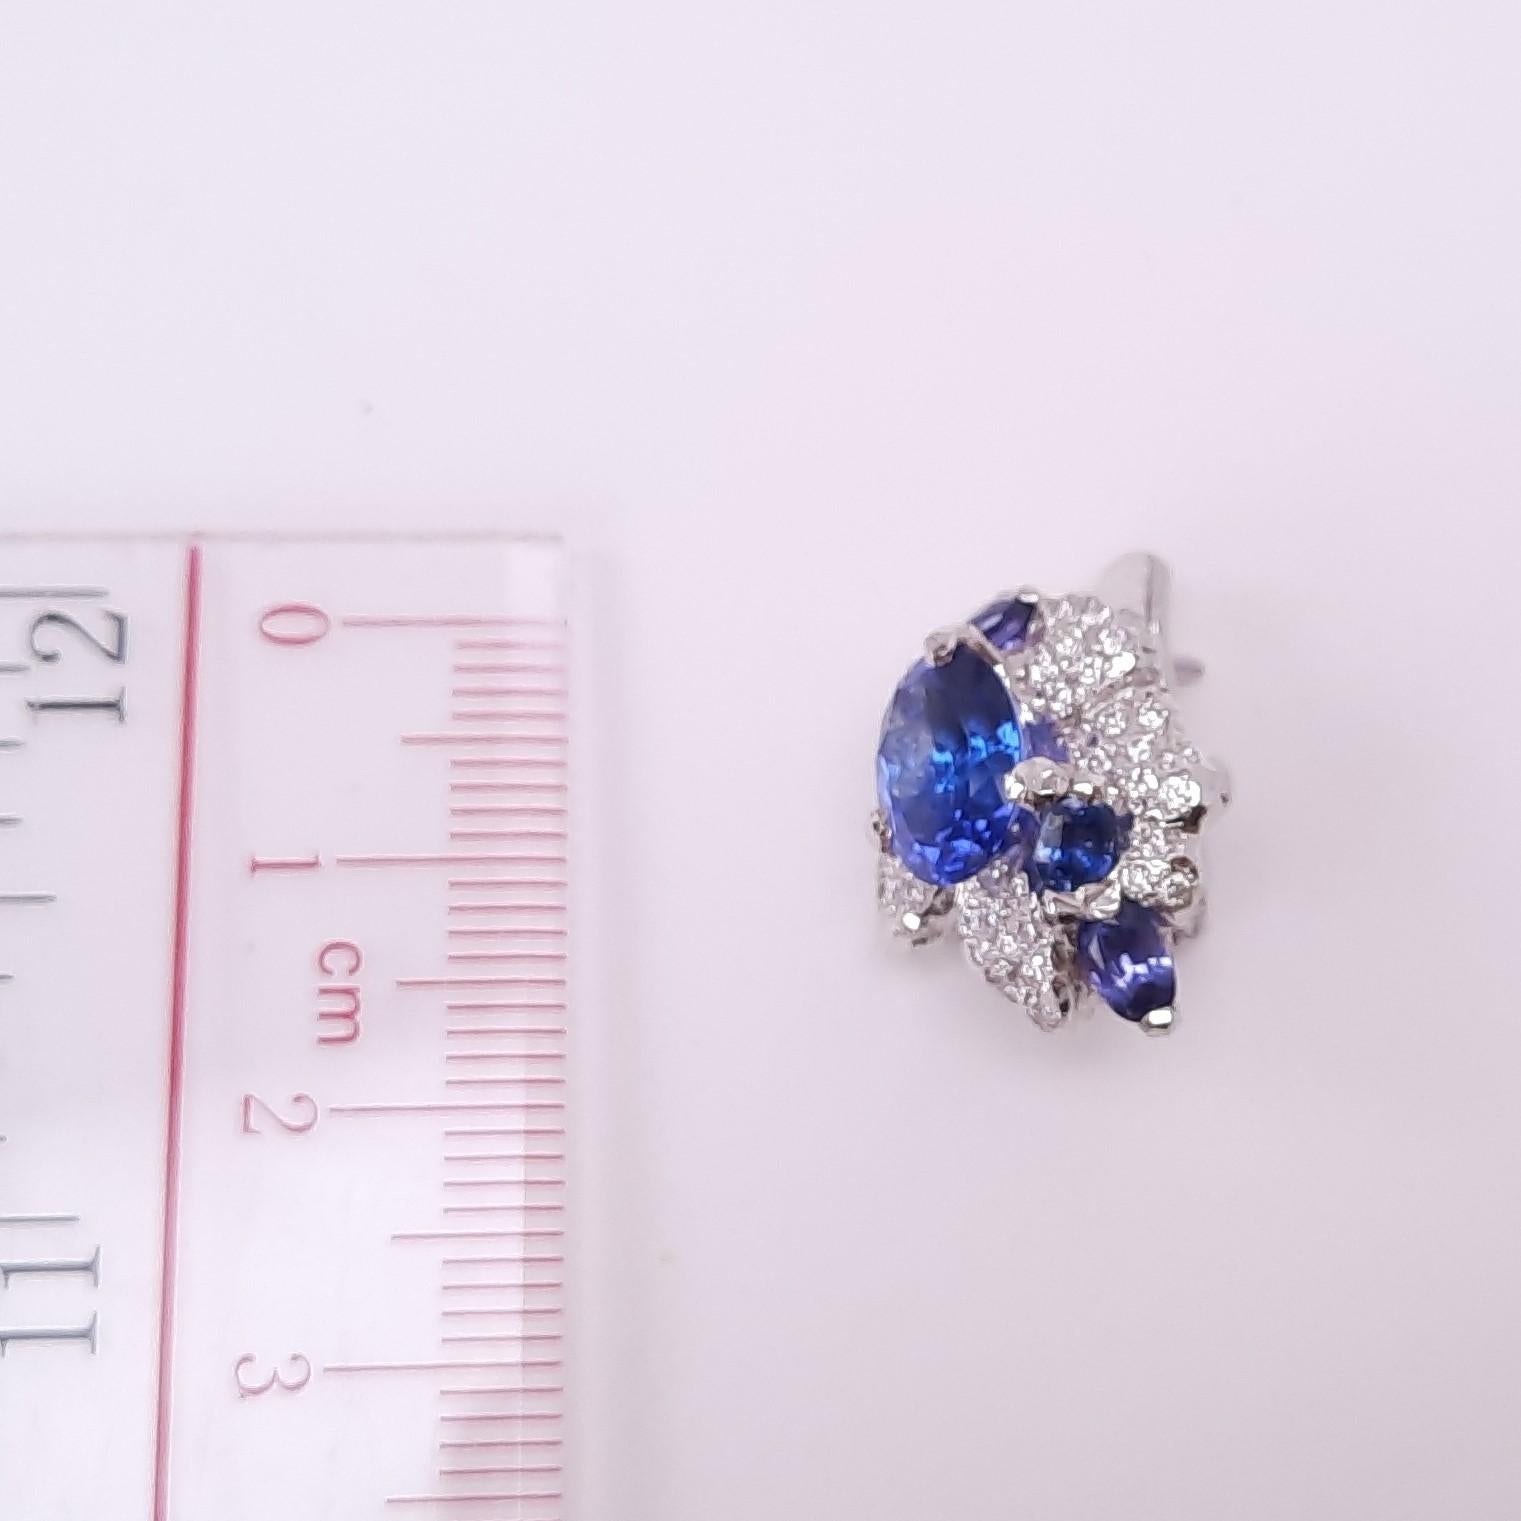 MOISEIKIN 18K Gold Handmade Tanzanite Diamond Earrings In Excellent Condition For Sale In Hong Kong, HK